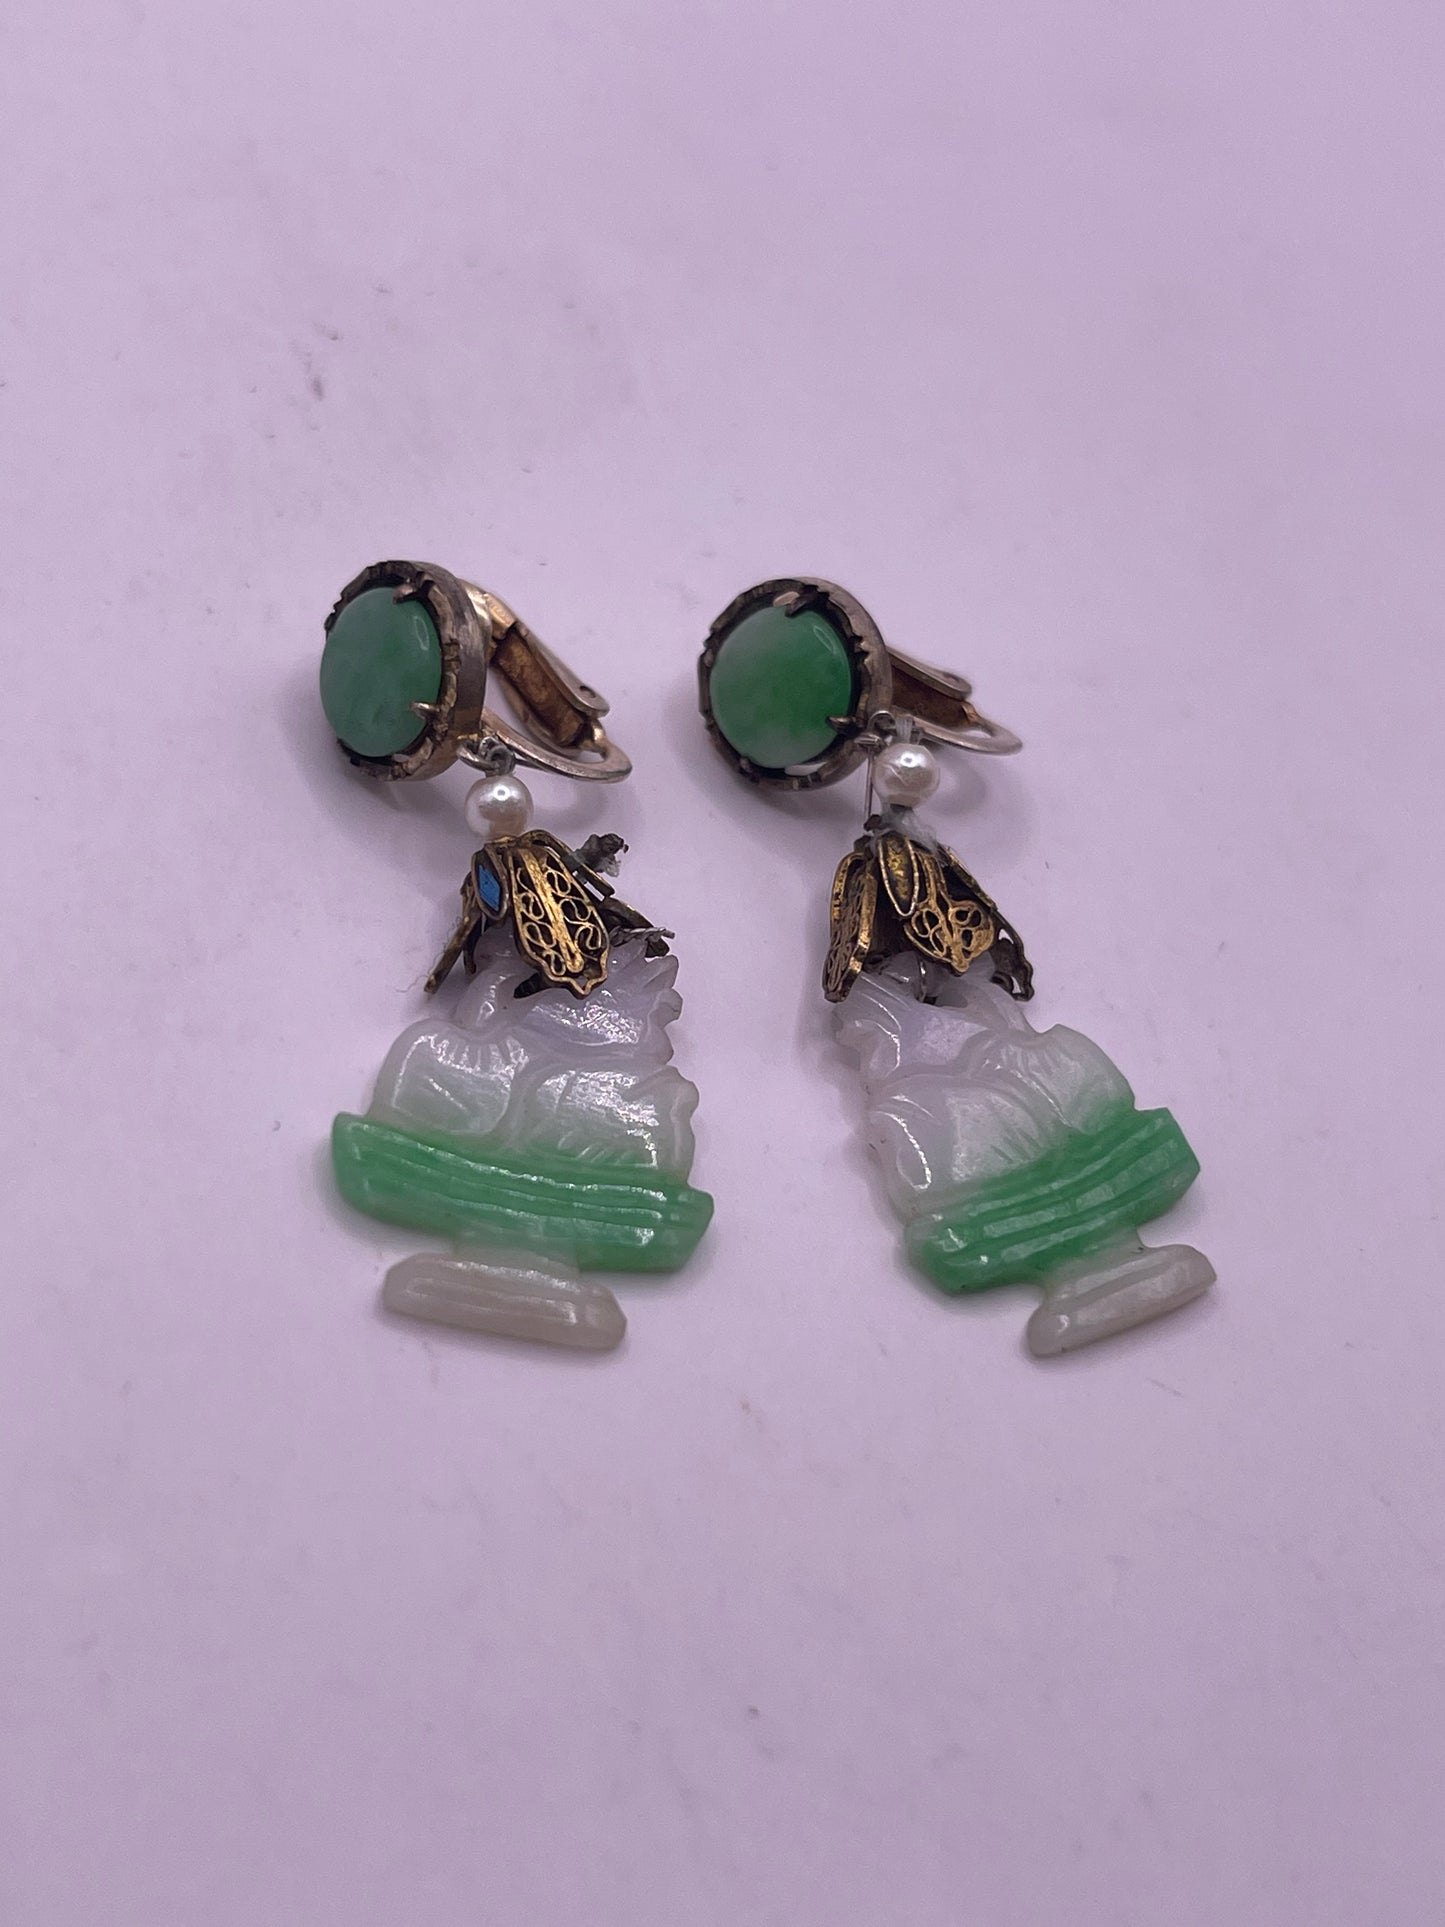 A pair of carved jade earrings in a gilded silver setting